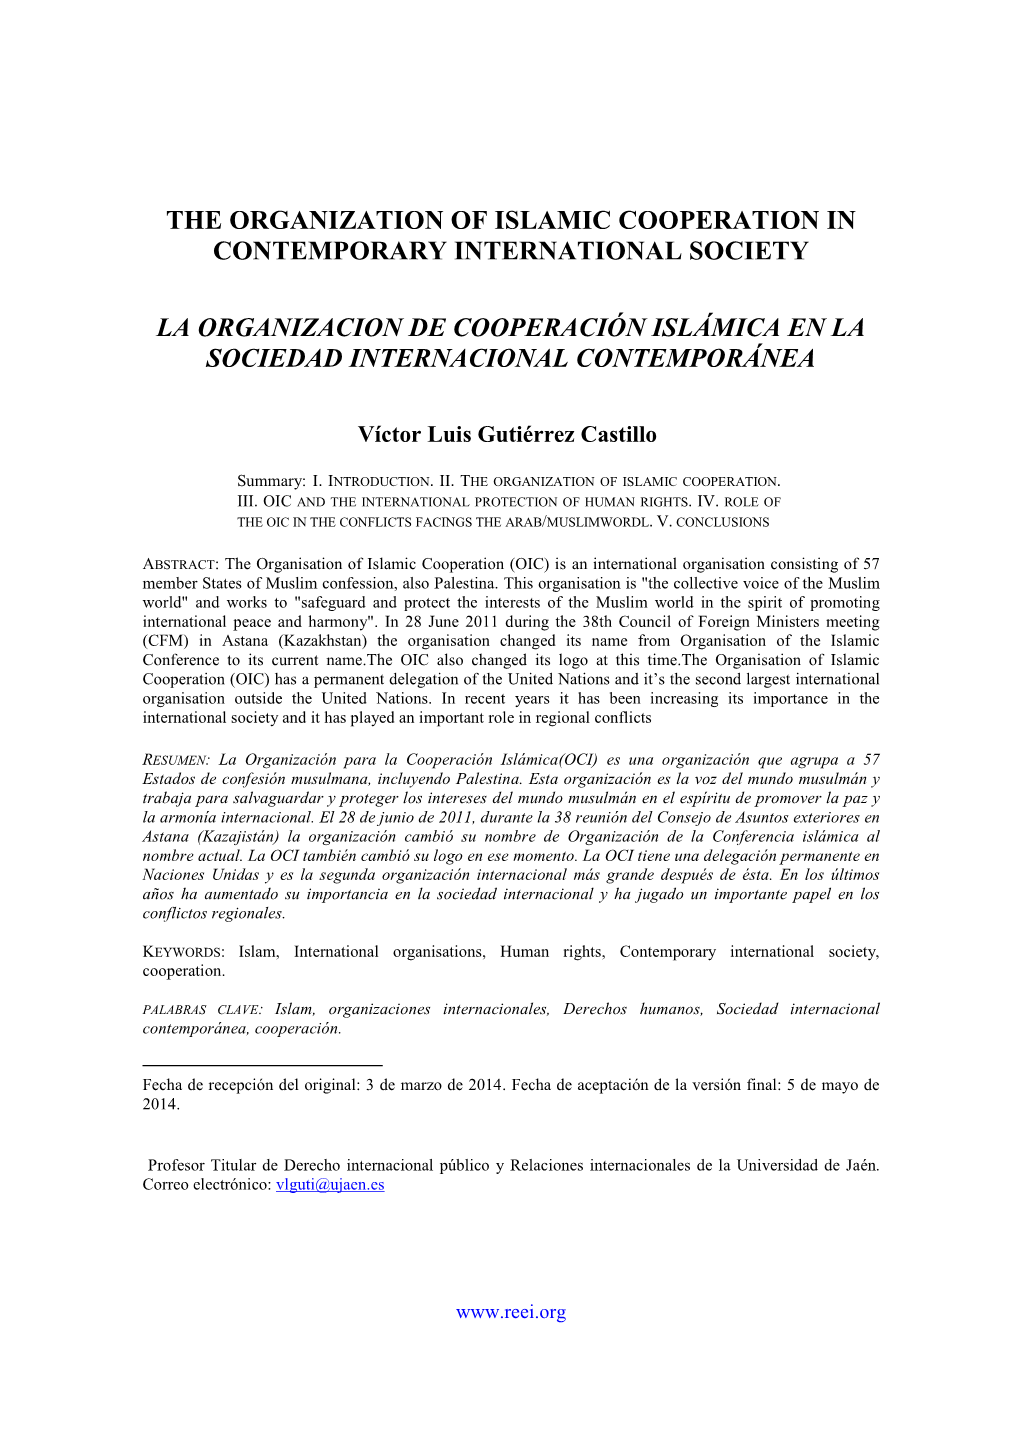 The Organization of Islamic Cooperation in Contemporary International Society